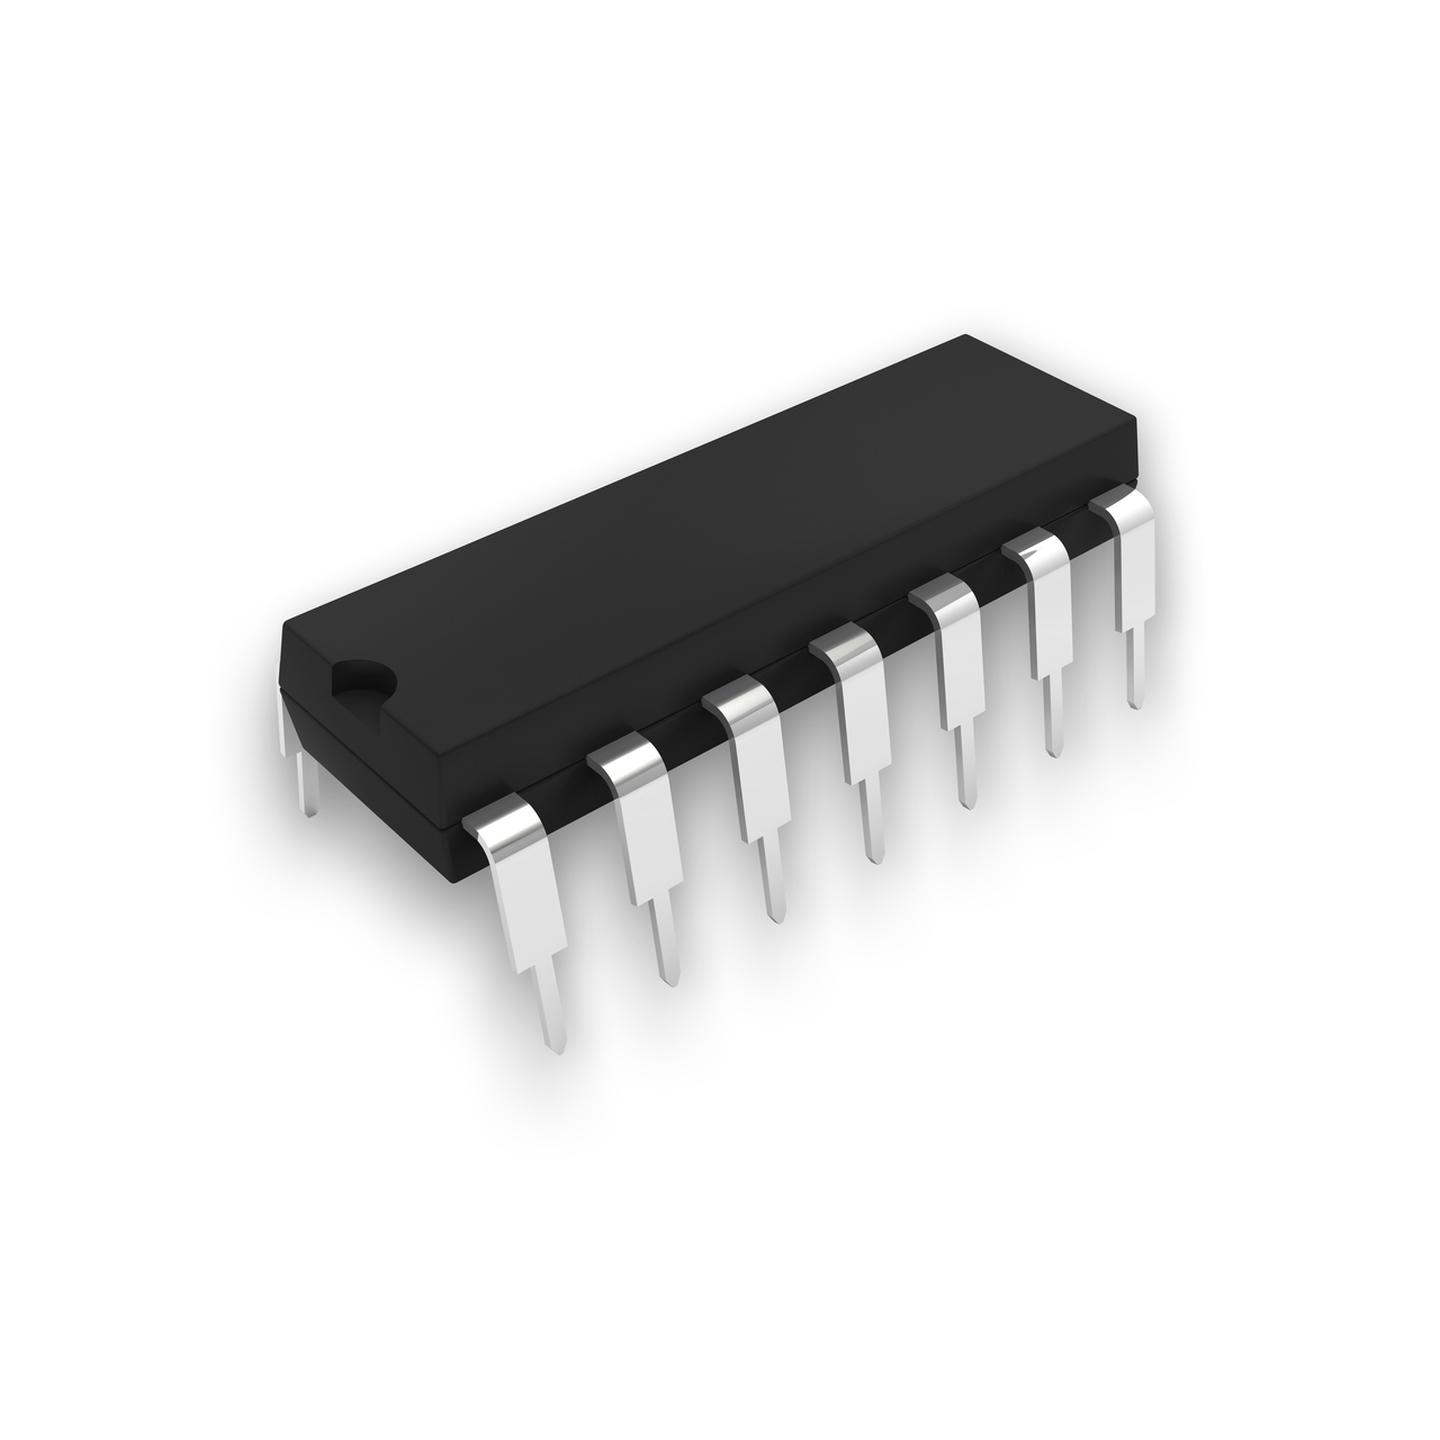 74LS08 Quad 2-Input AND Gate IC low power Schottky